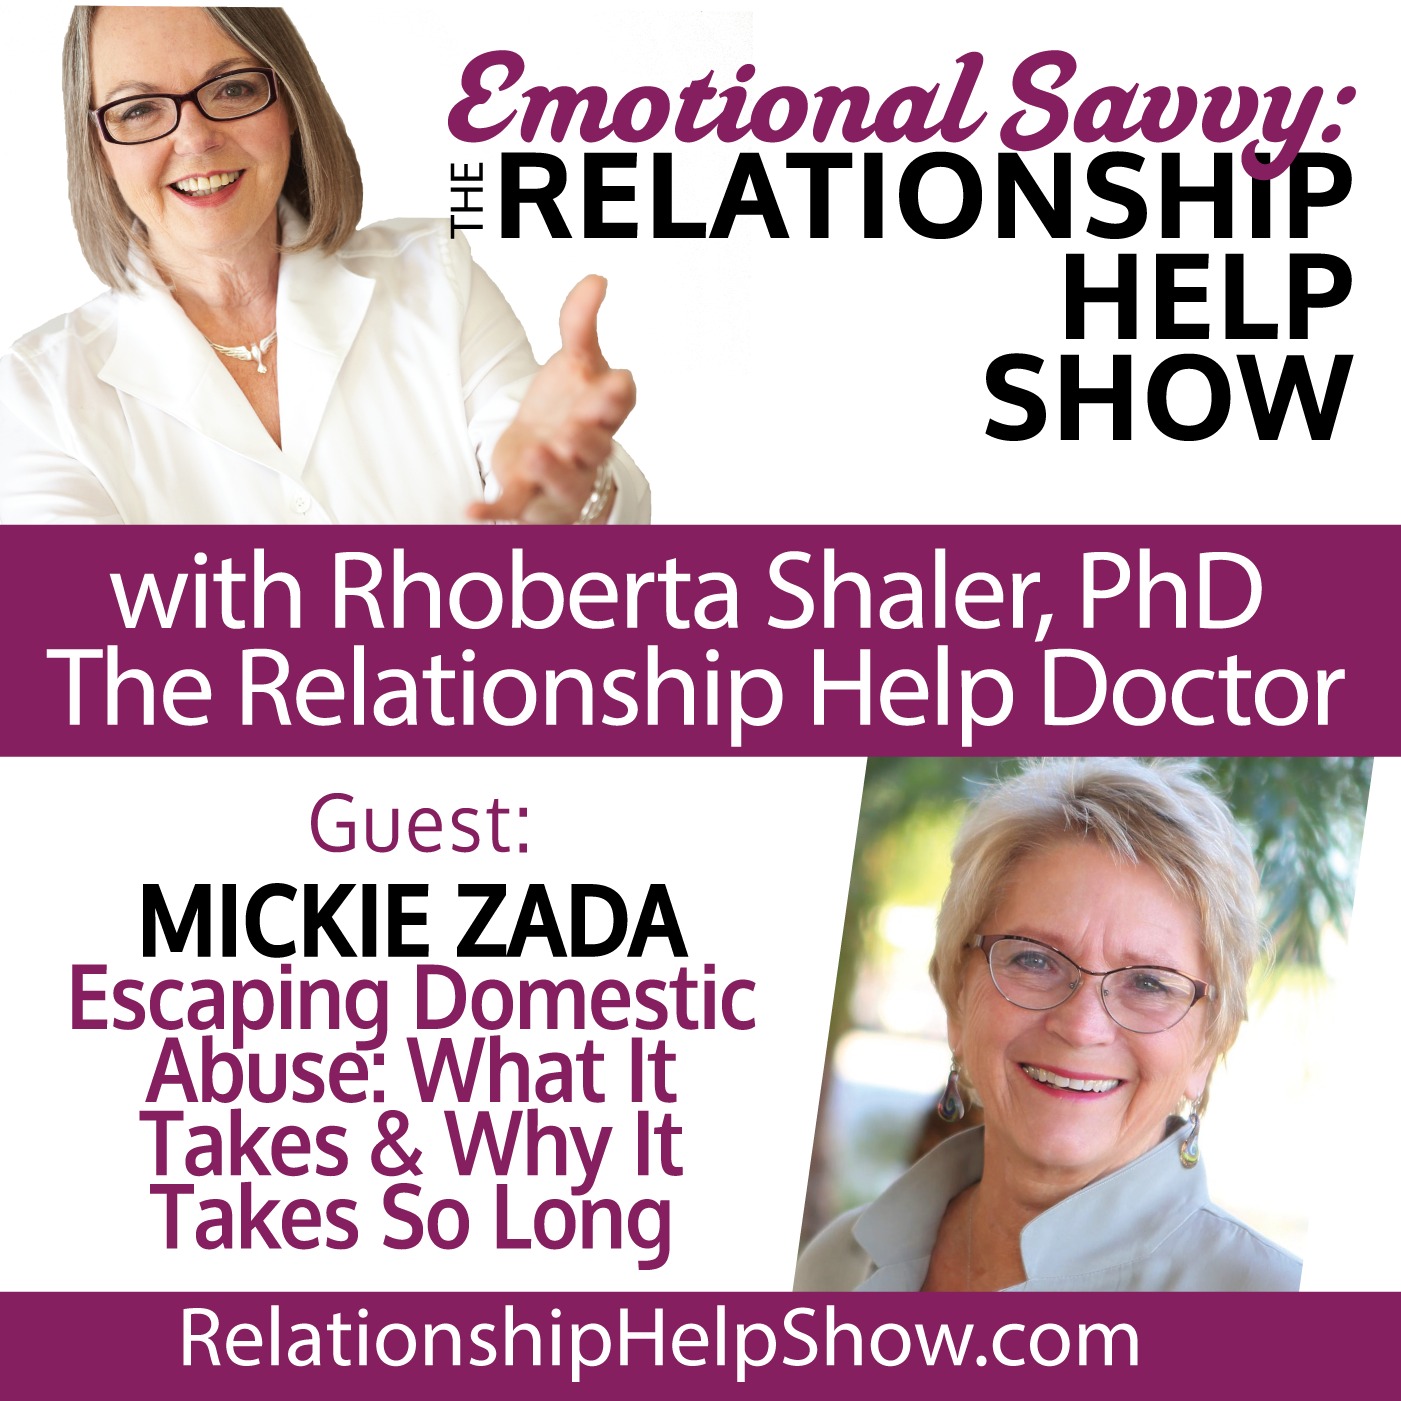 Speaking Up! Escaping Domestic Abuse: What It Takes & Why It Takes So Long GUEST: Mickie Zada